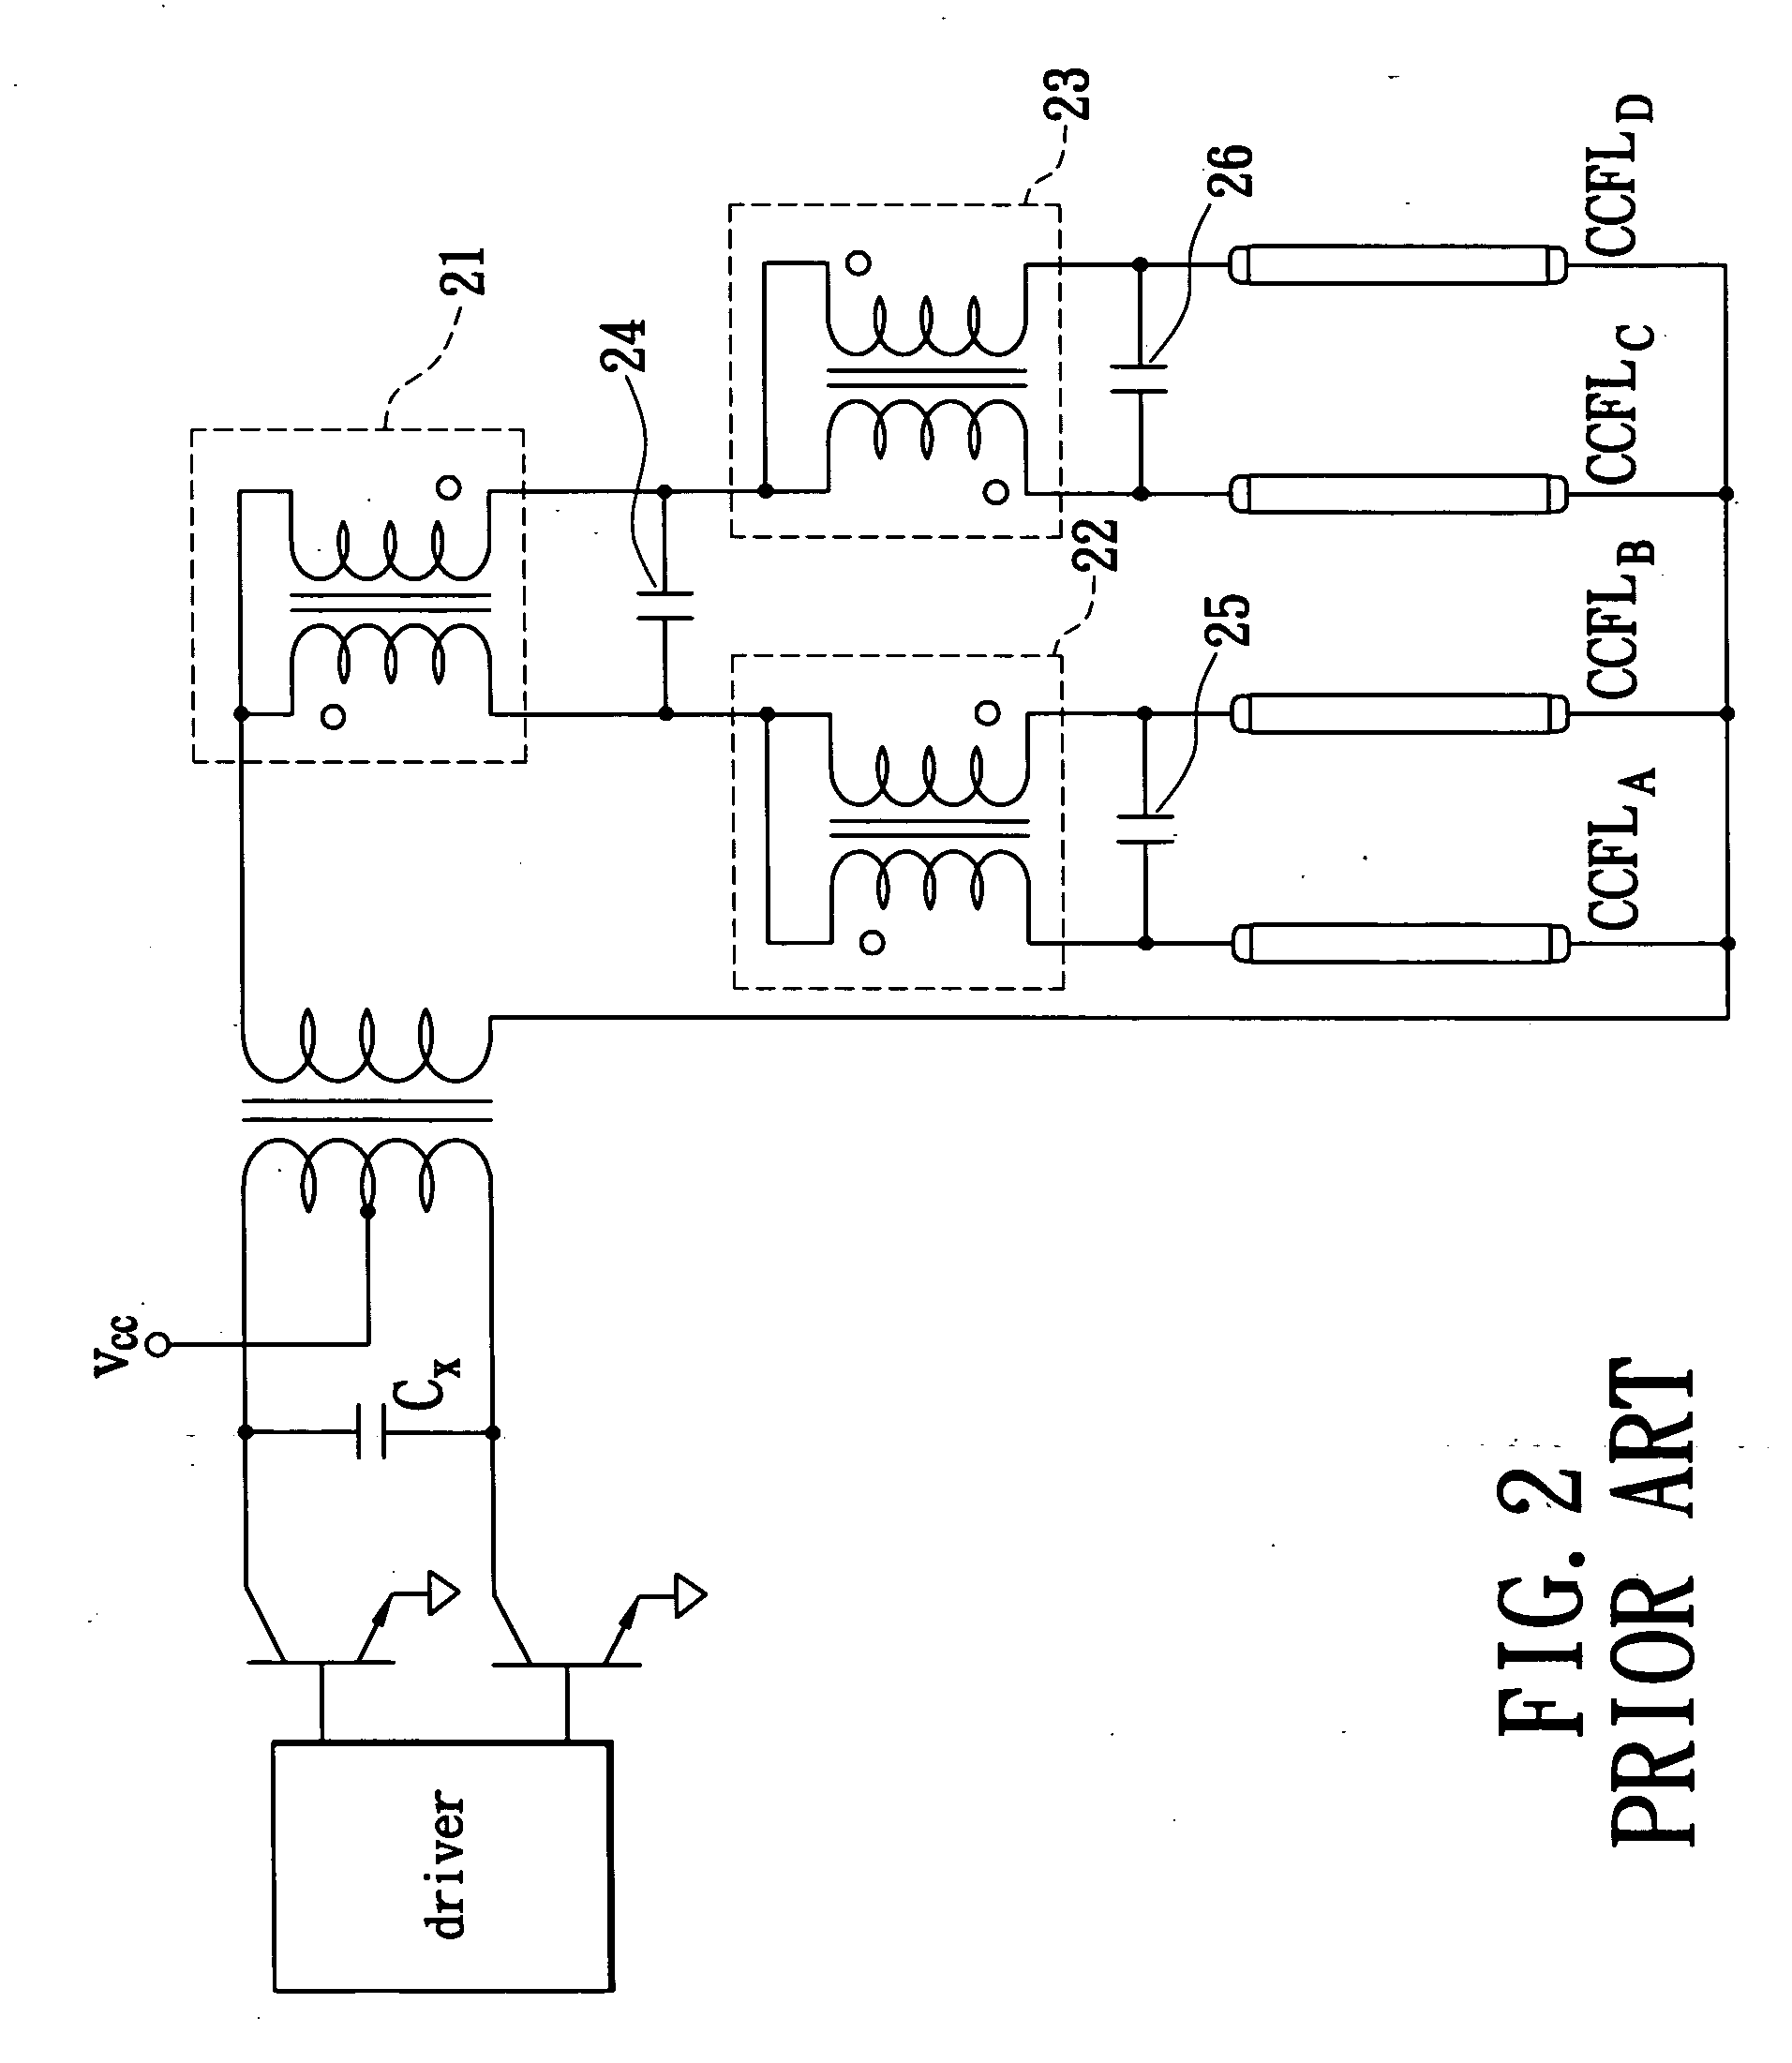 Multiple-ccfl parallel driving circuit and the associated current balancing control method for liquid crystal display